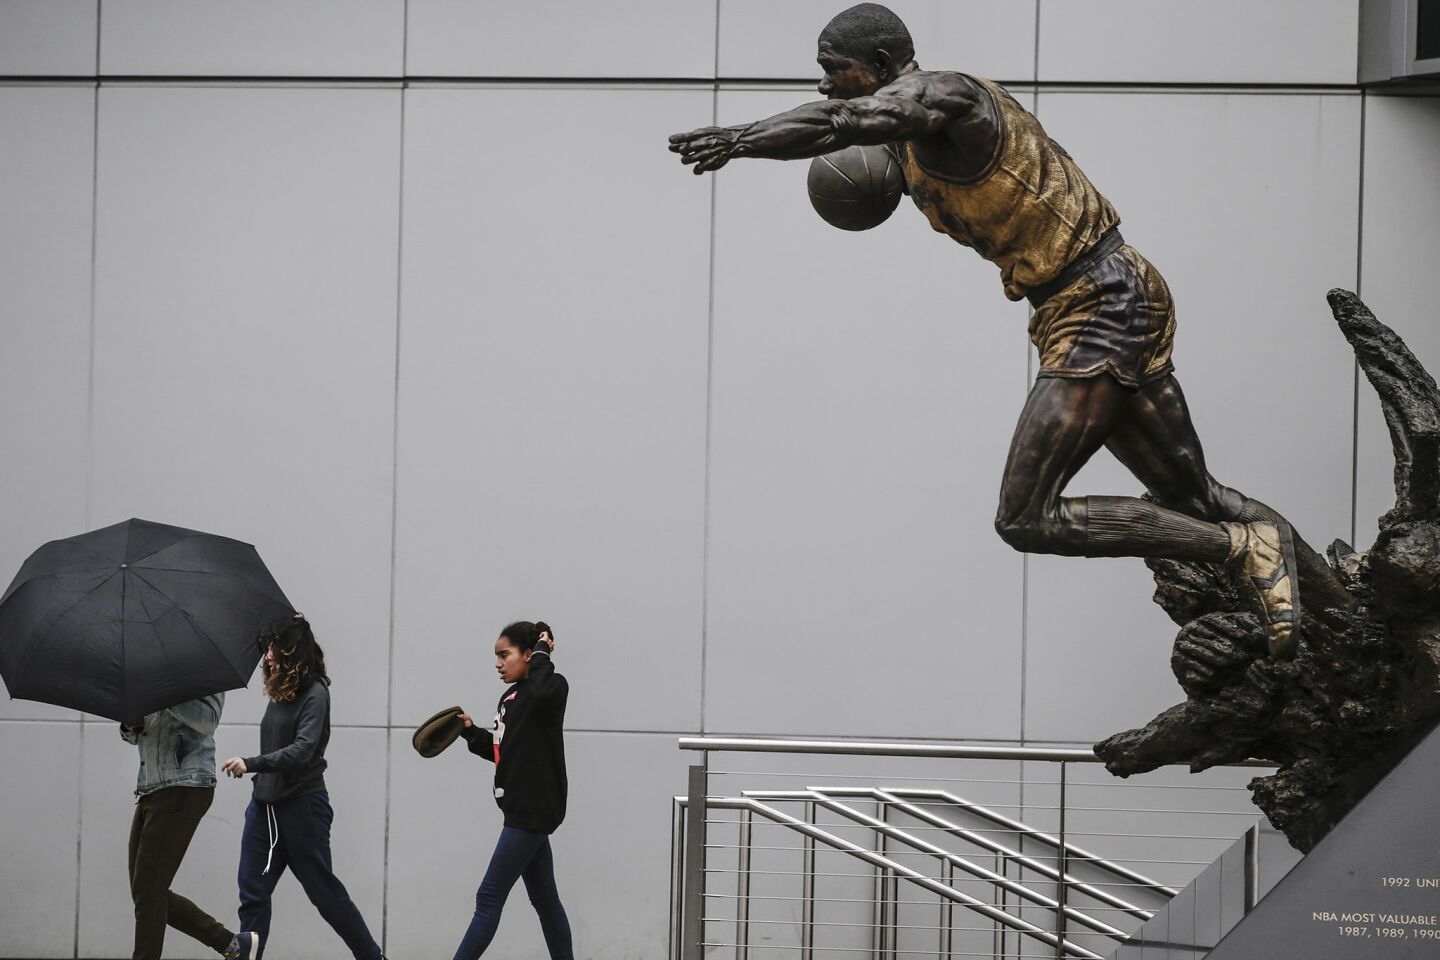 Pedestrians pass a statue of Magic Johnson leaning into a blustery wind outside Staples Center in downtown Los Angeles on Wednesday.